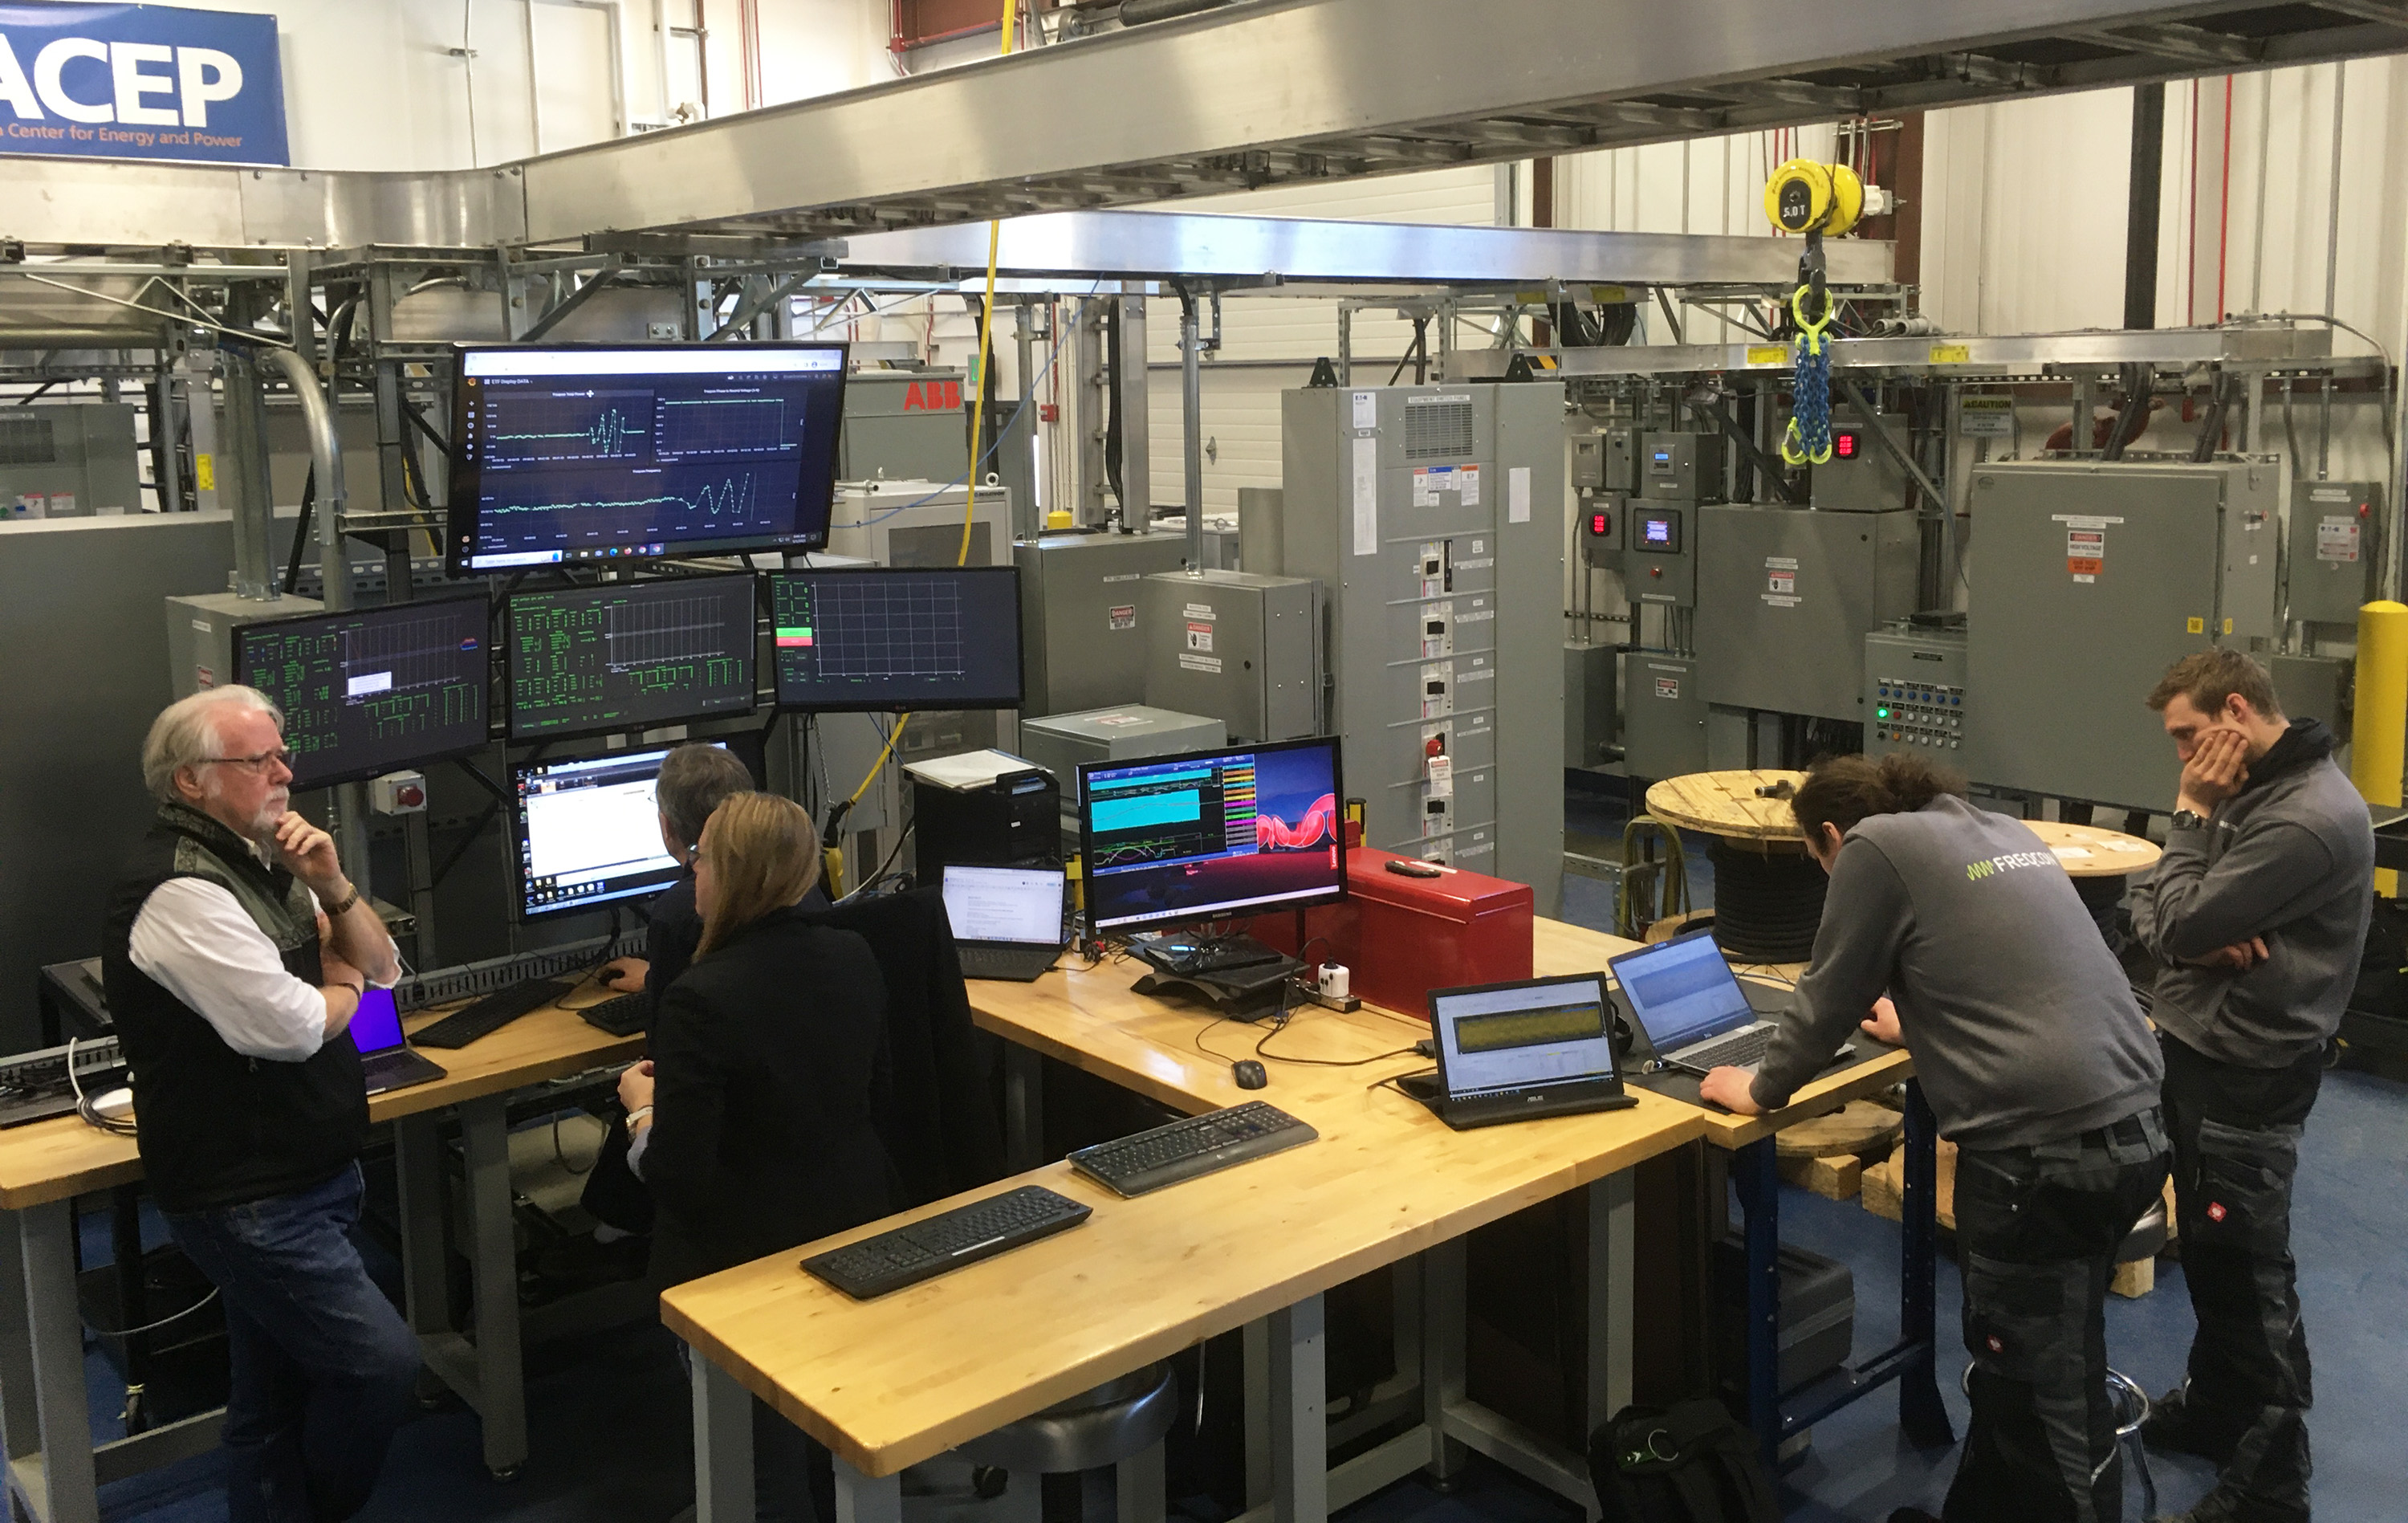 ACEP, AVEC and Freqcon staff troubleshoot the GBS modules in the ACEP Energy Technology Facility lab.